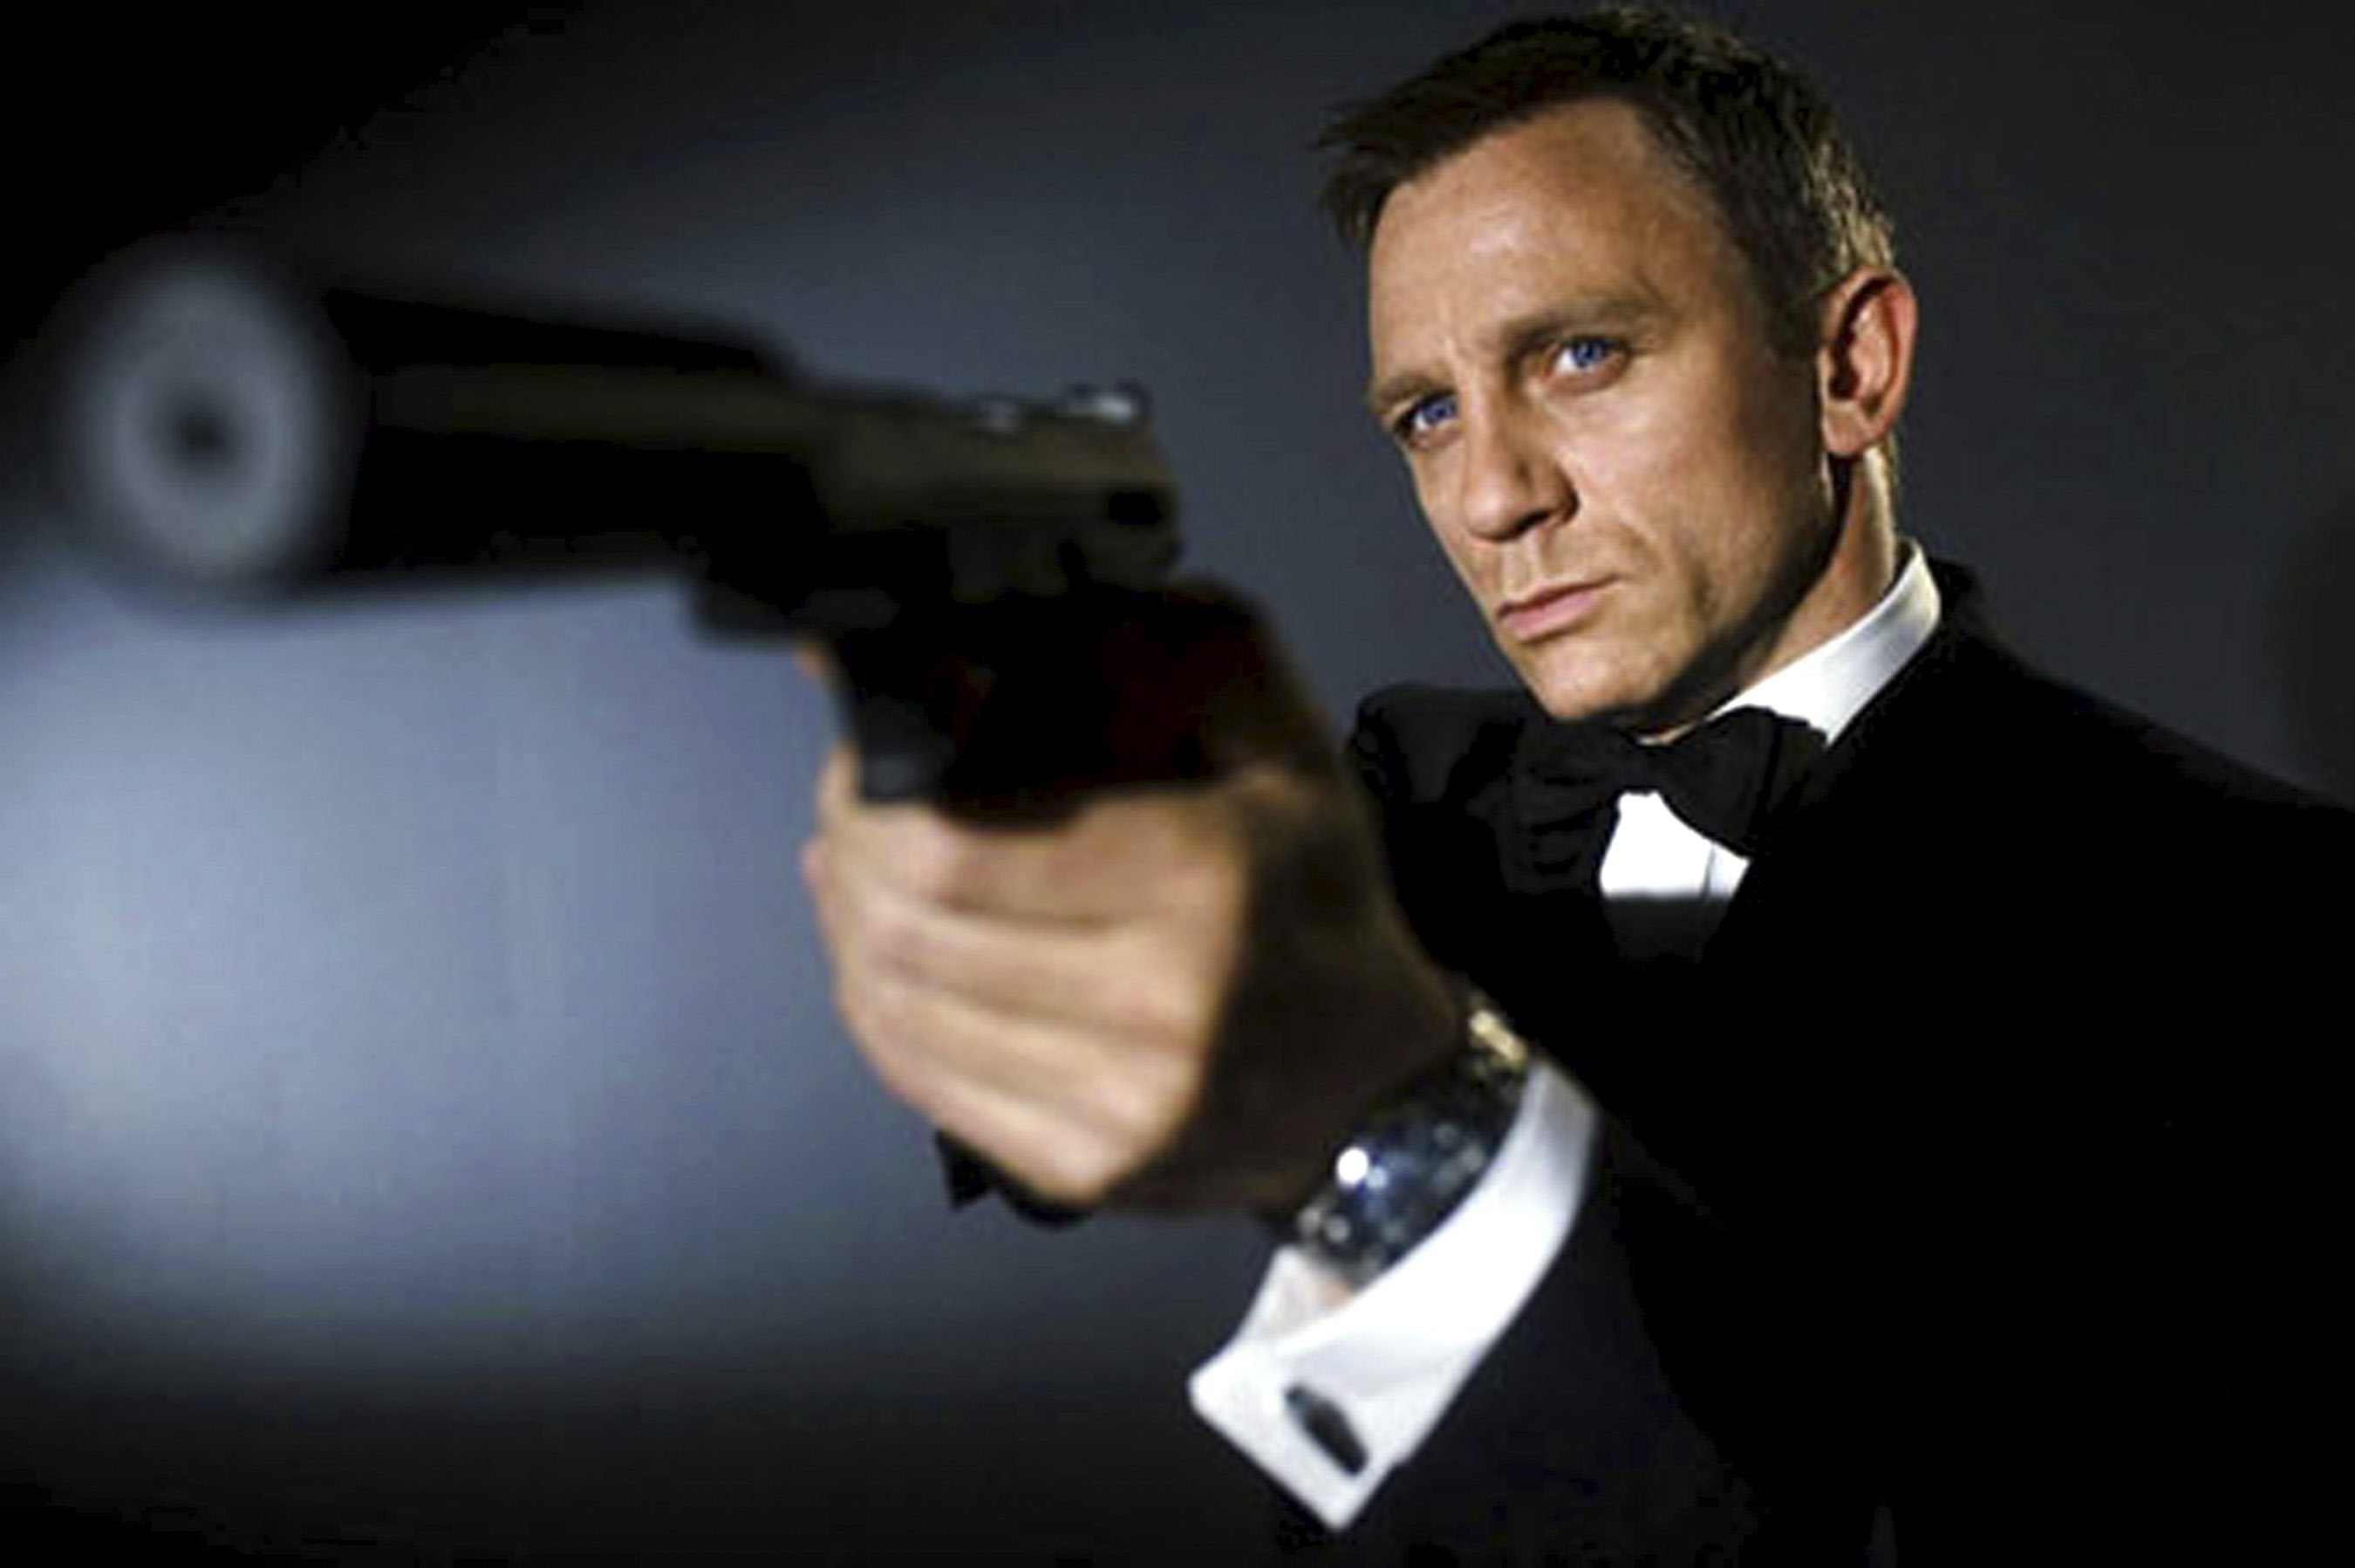 007 - a masculine hero. And yes that's a gun in his hand, Lena Dunham. 